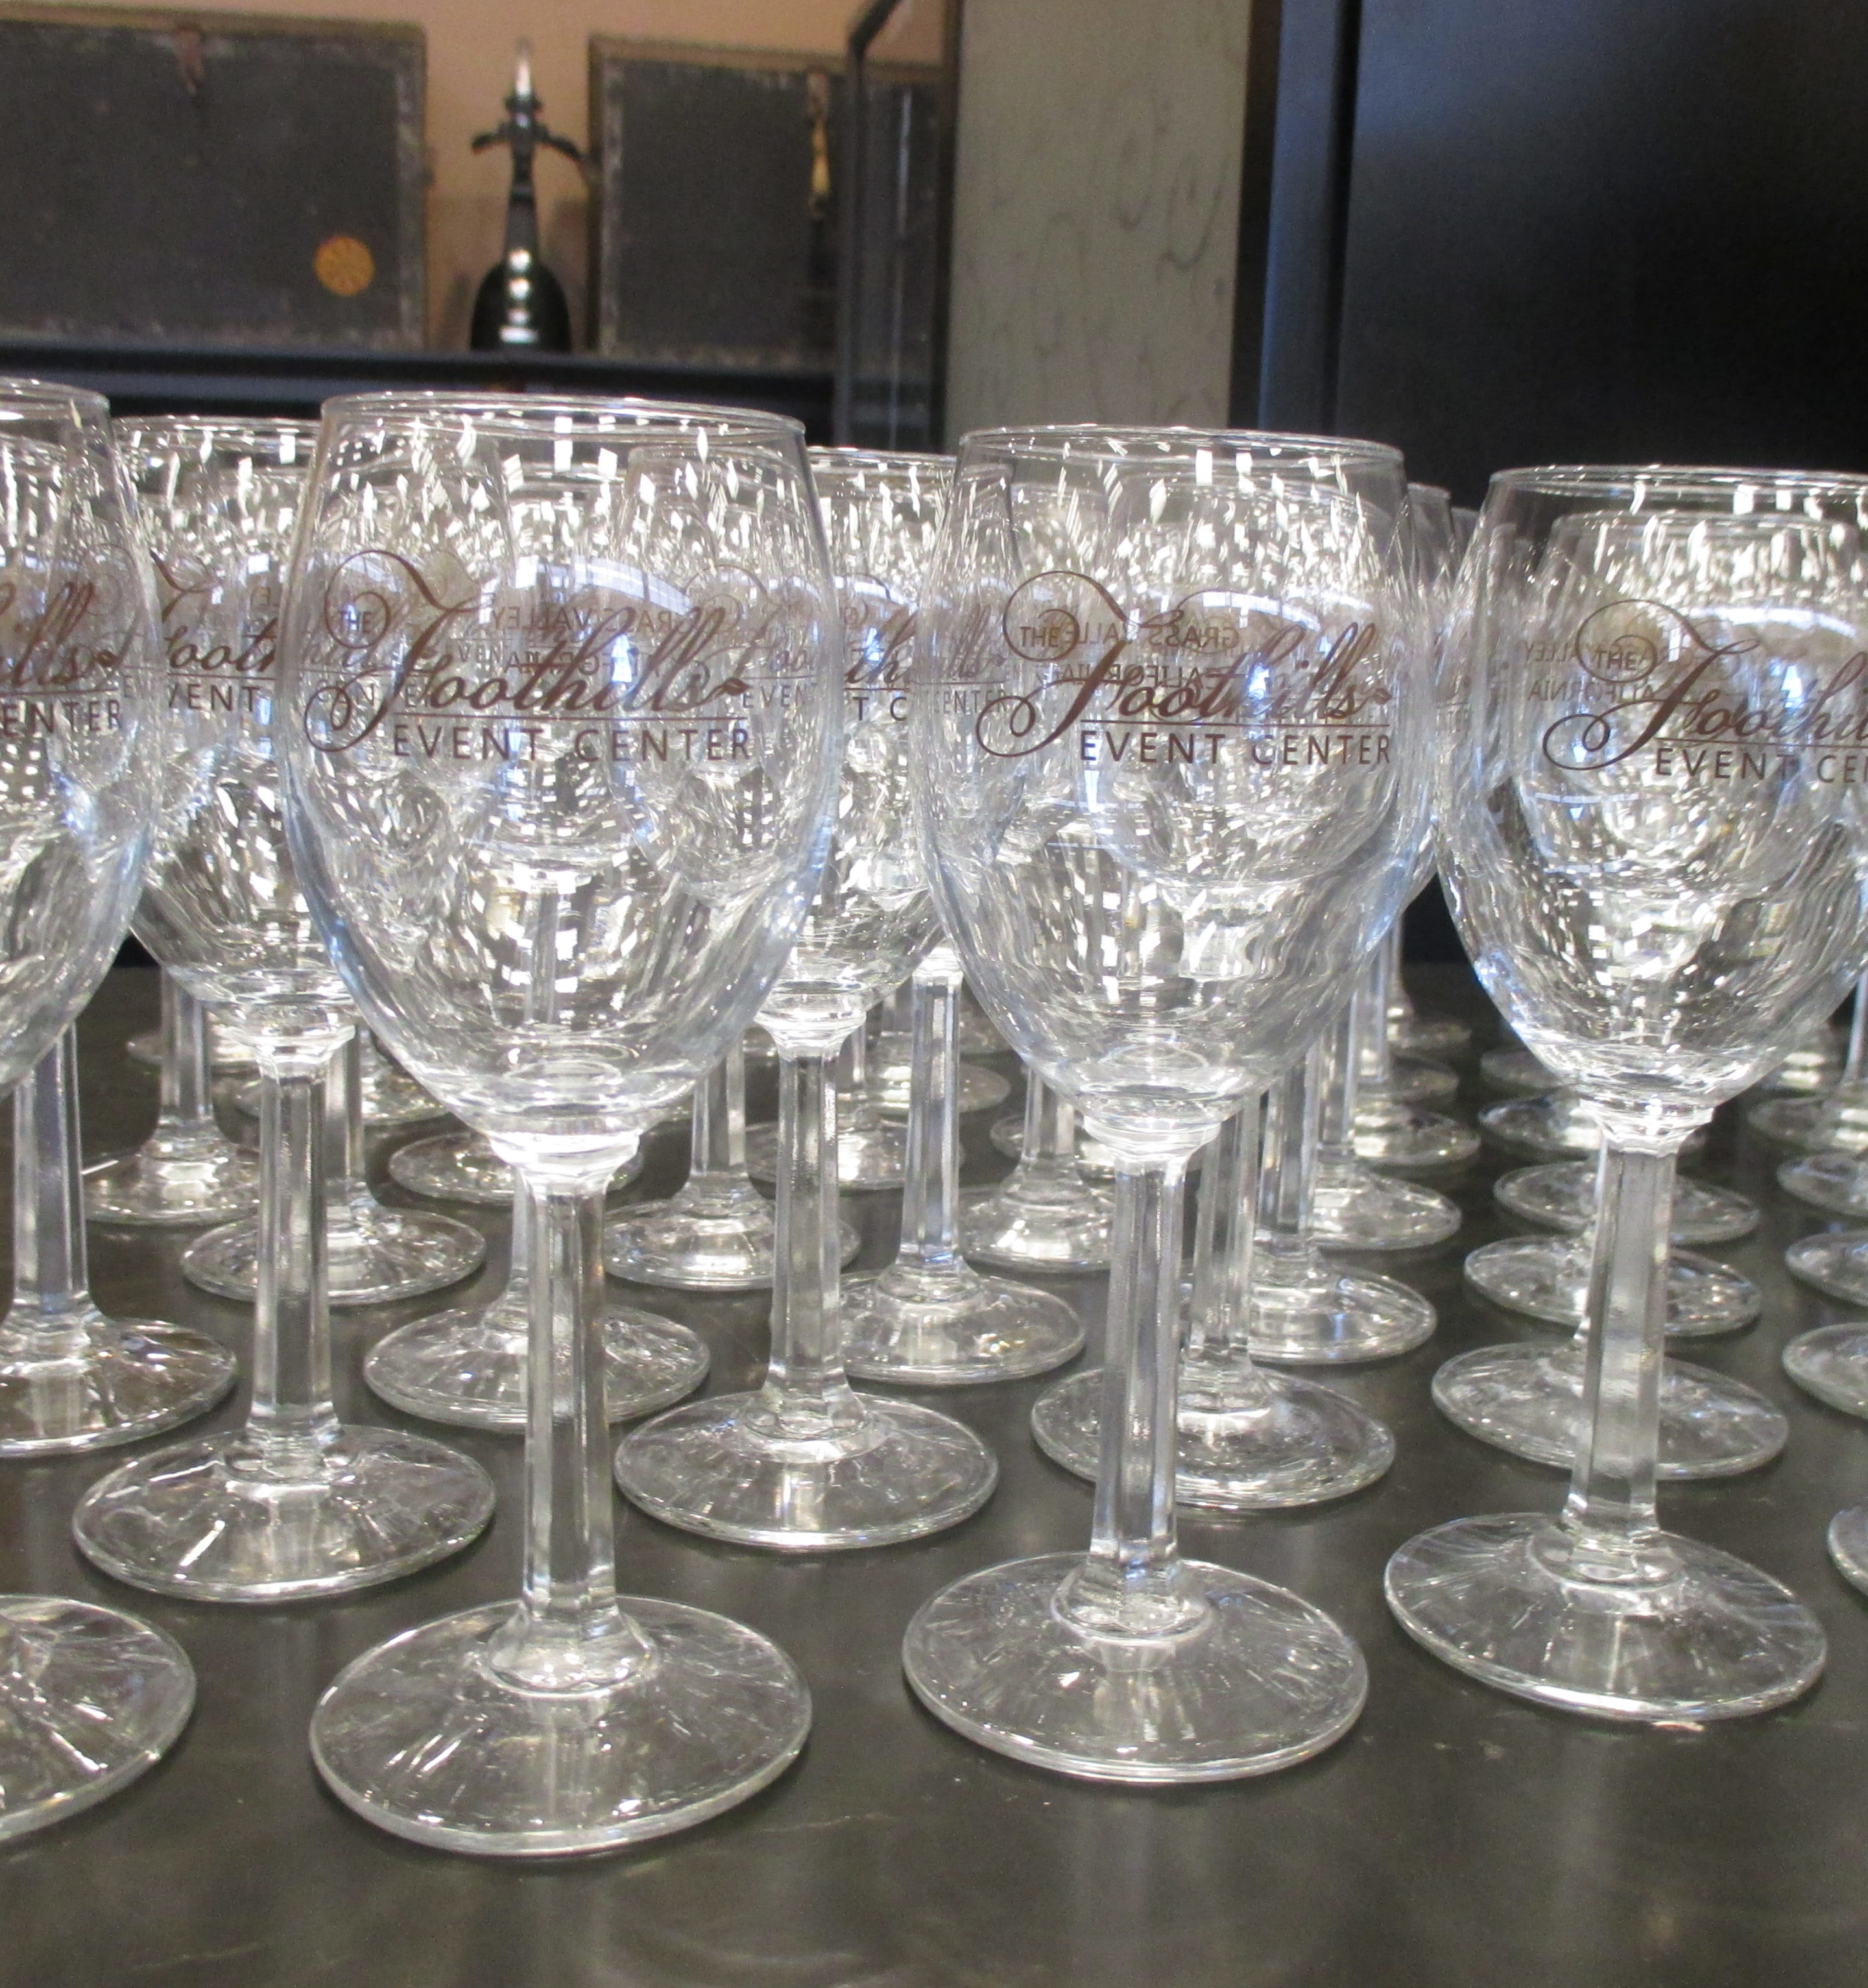 Wine glass rental service at venue in Grass Valley